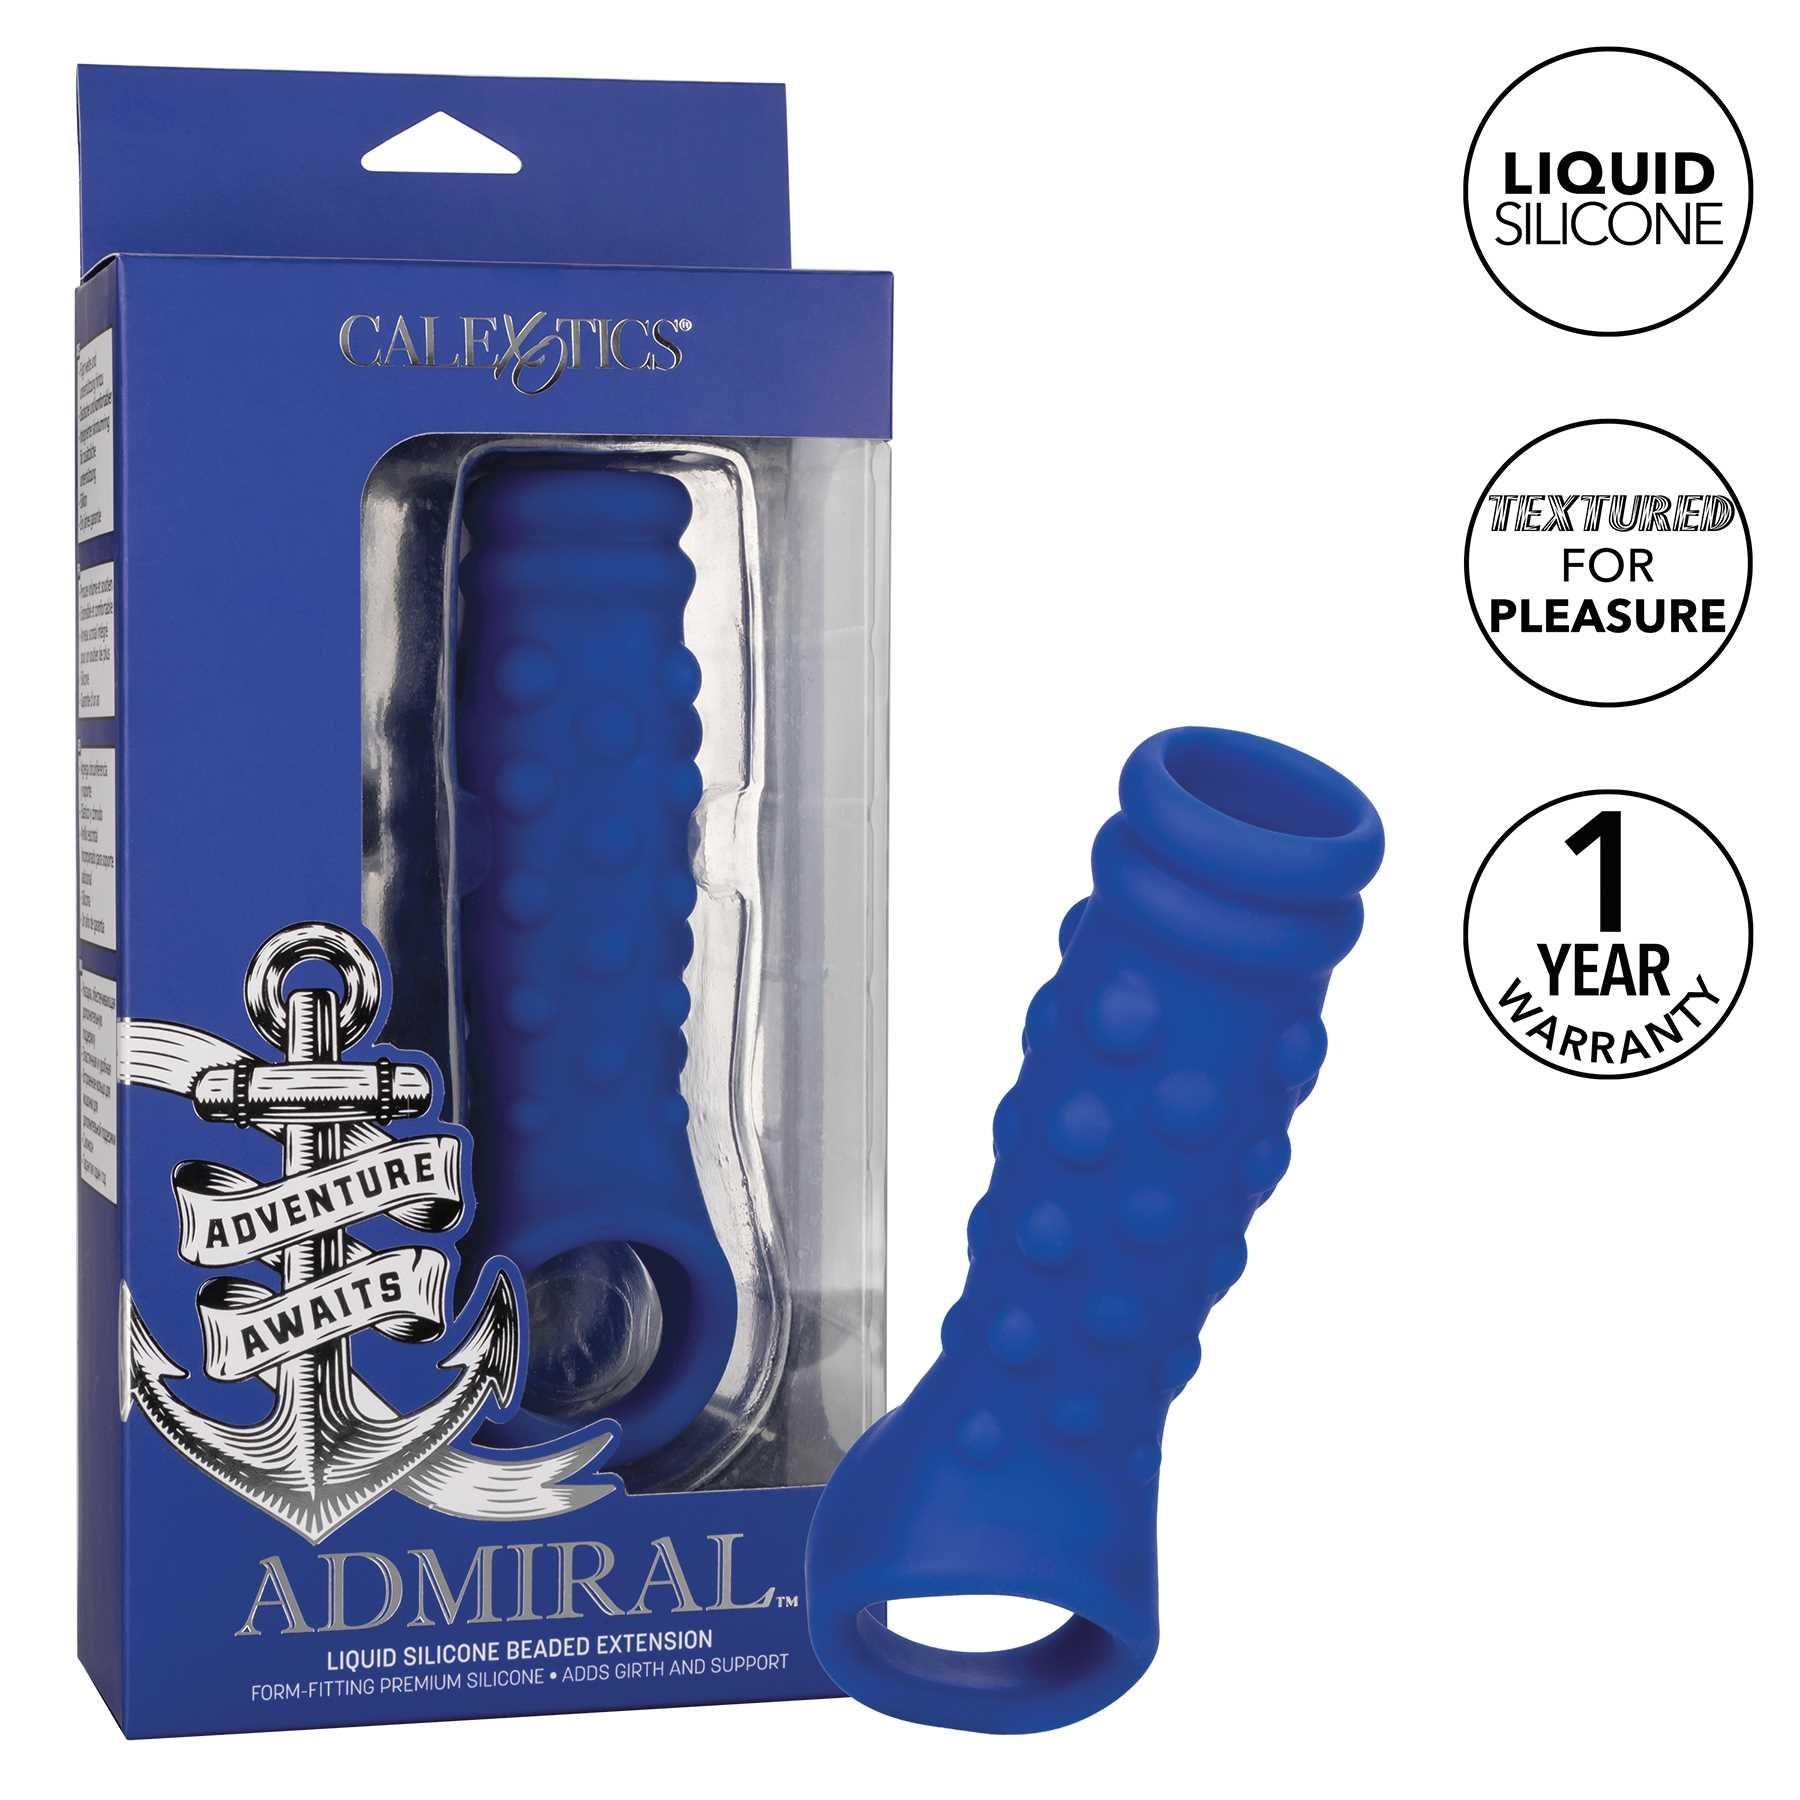 Admiral Silicone Beaded Extension with feature listing